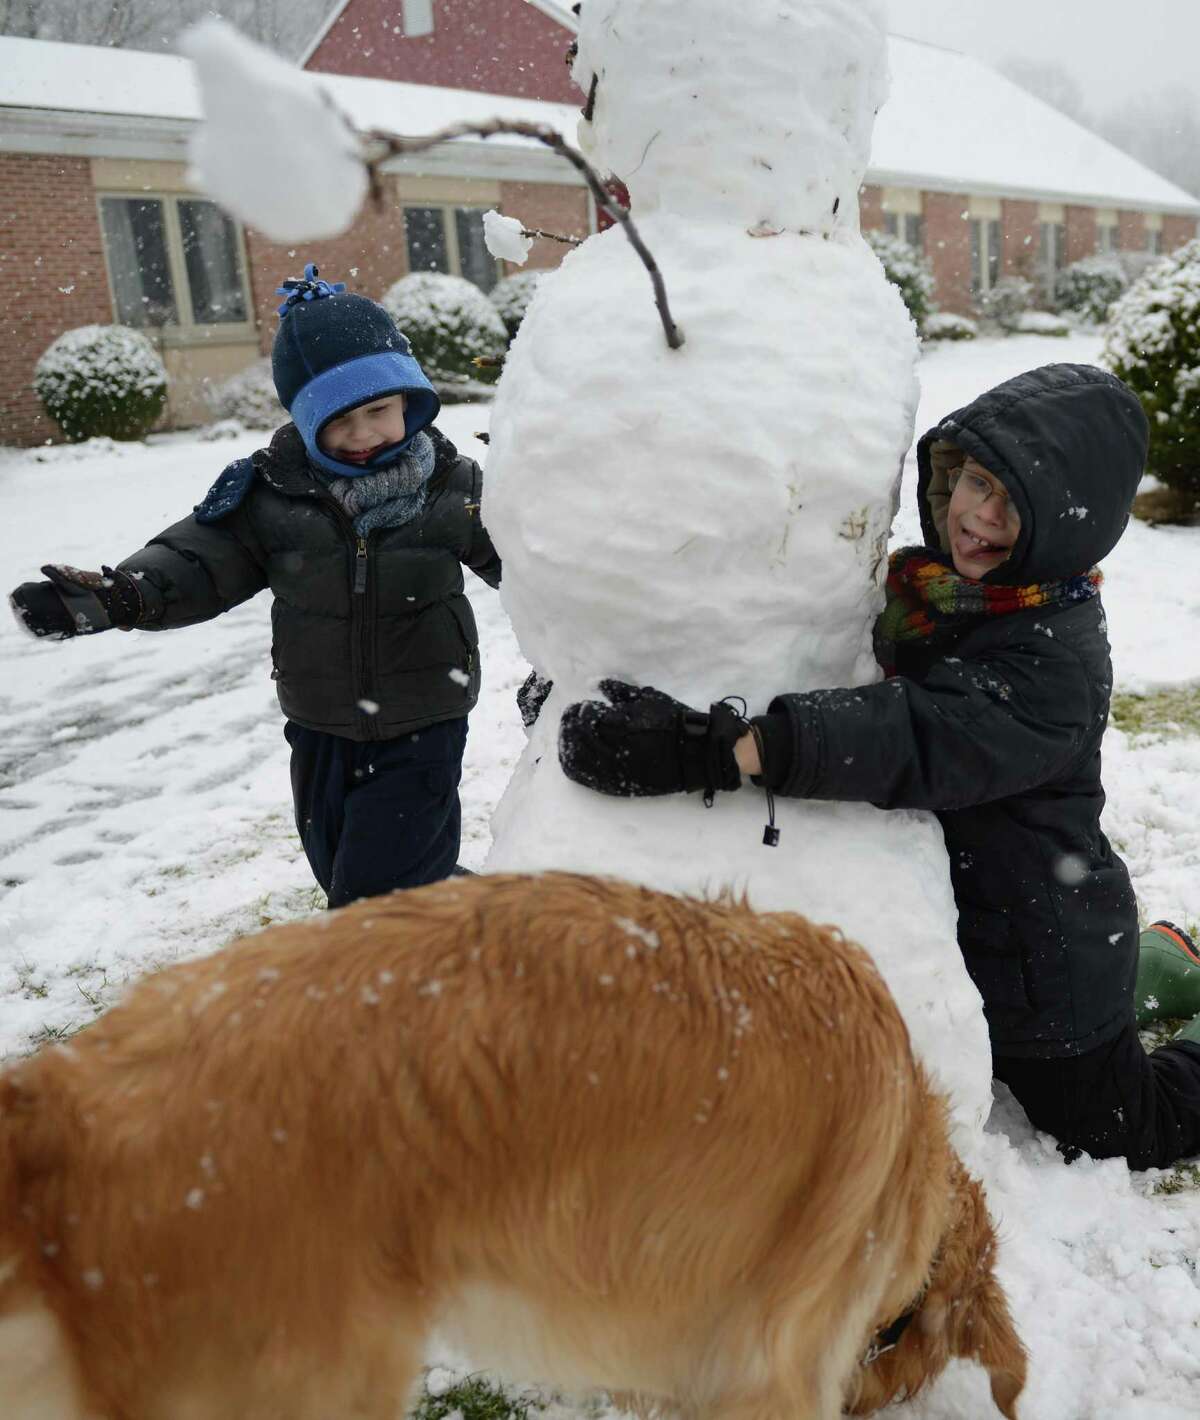 Isaiah Morris, left, 4, and his brother Elijah, 7, hug a snowman that they built in front of Christ the King Lutheran Church in Newtown, Conn. on Saturday, Jan. 18, 2014. The area received a surprise snowstorm Saturday, with Danbury getting just one inch of snow but other areas getting up to three inches.